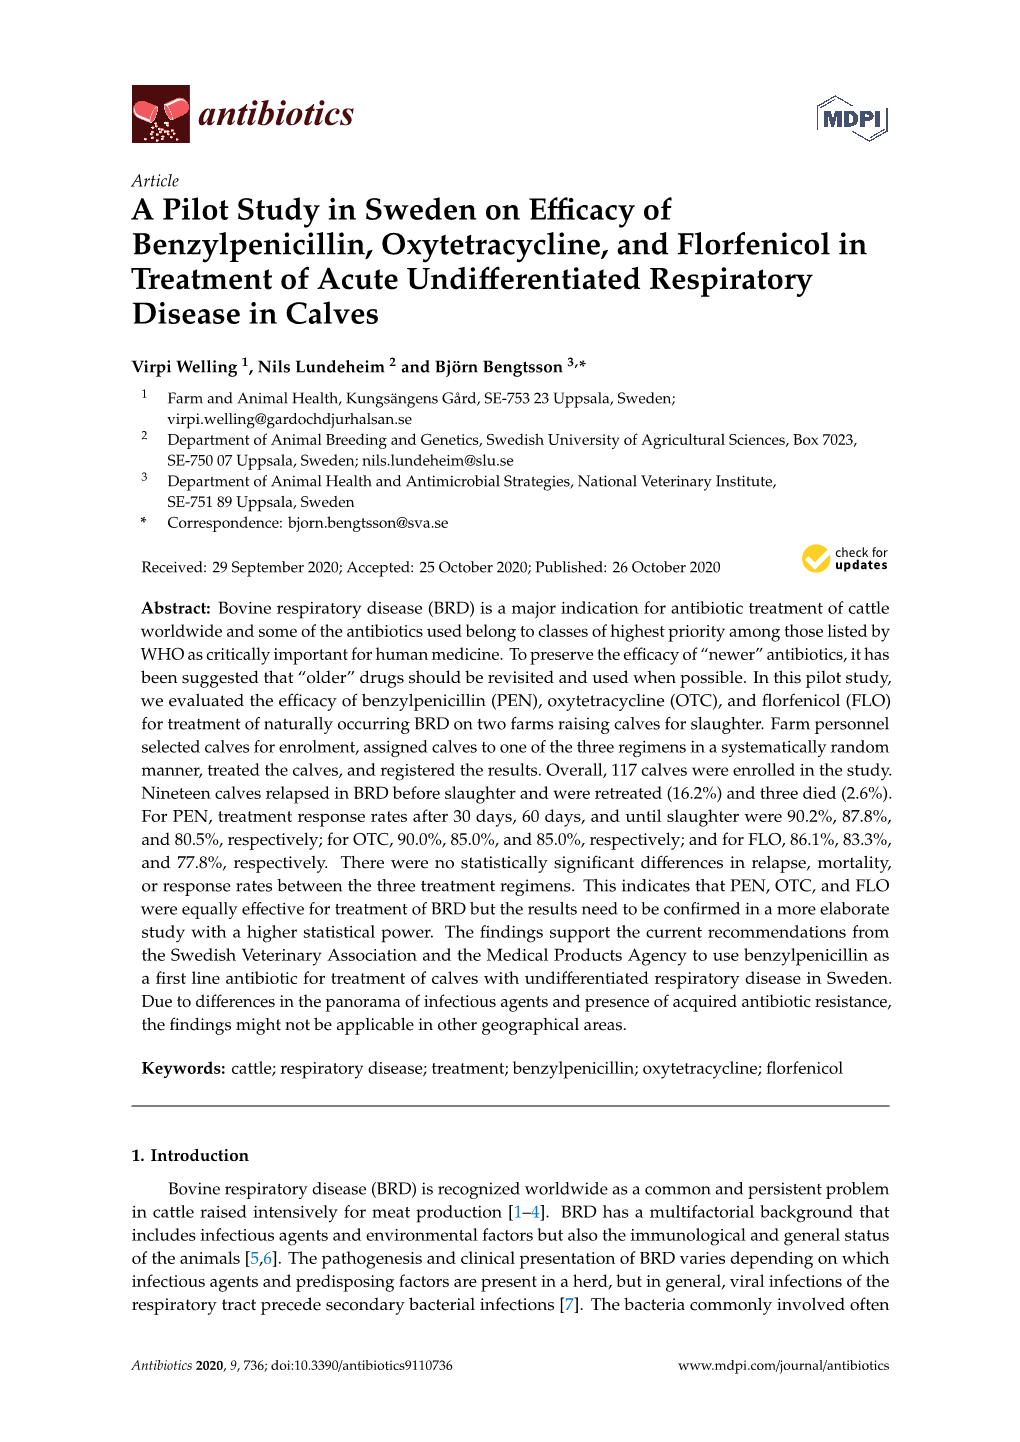 A Pilot Study in Sweden on Efficacy of Benzylpenicillin, Oxytetracycline, and Florfenicol in Treatment of Acute Undifferentiated